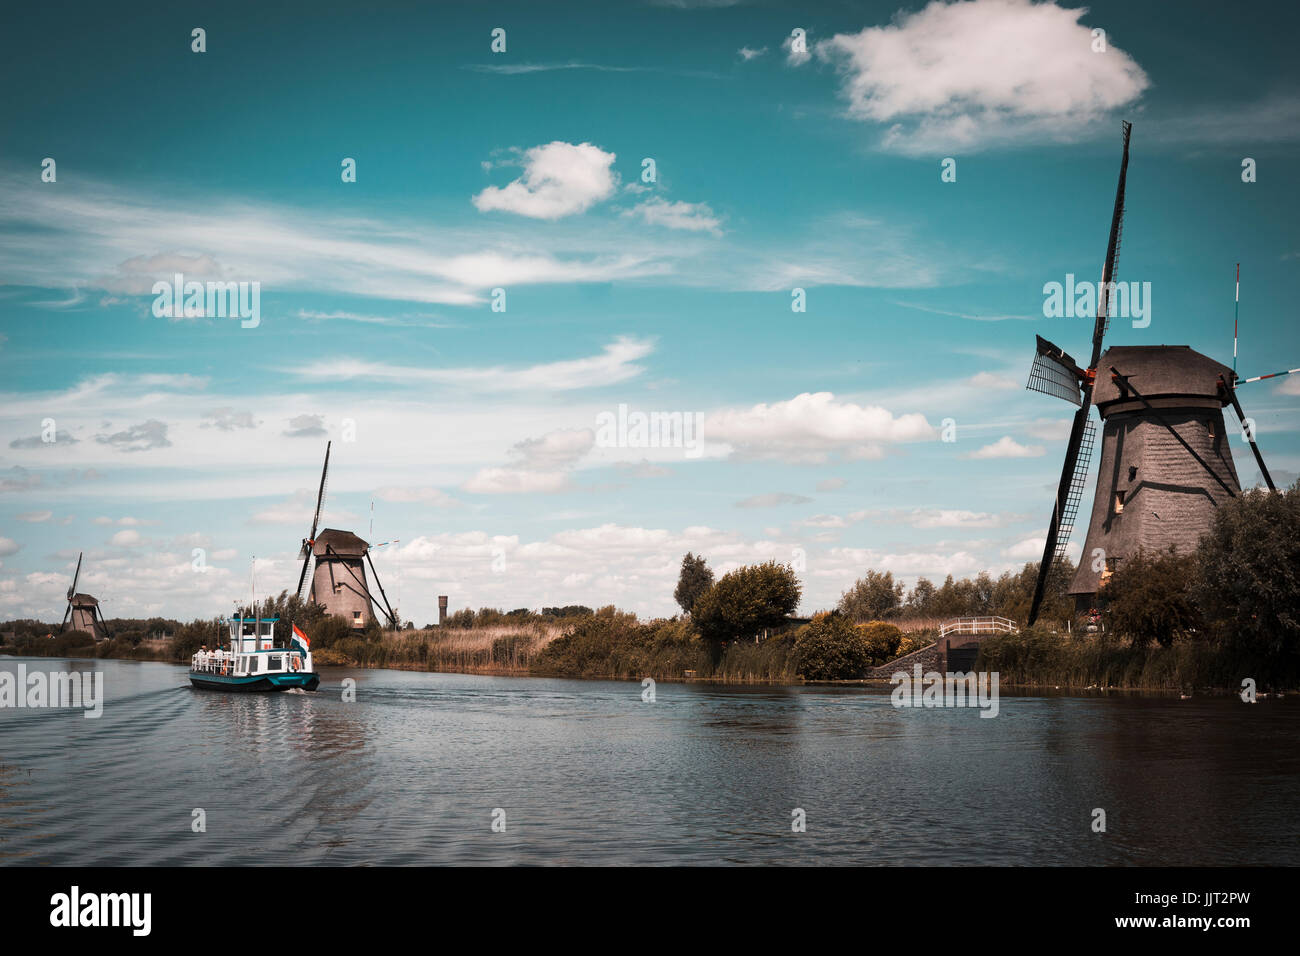 kinderdijk landscape with the typical 19 windmills Stock Photo